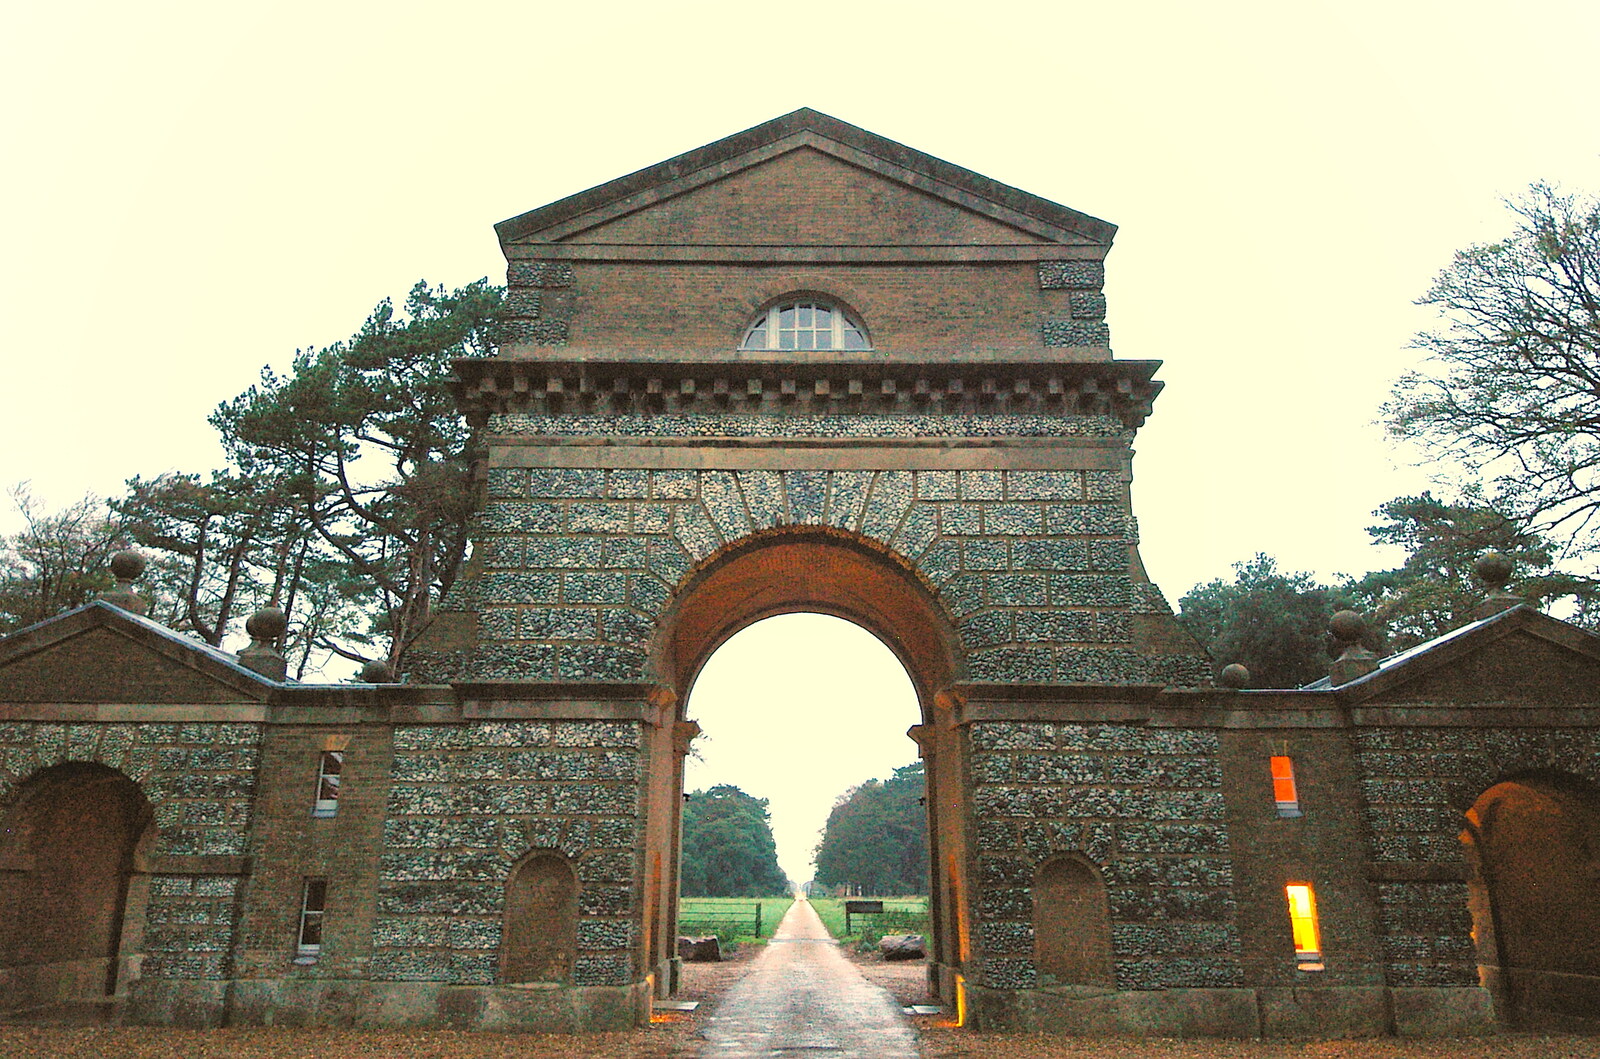 The Triumphal Arch, Holkham from Mother, Mike and the Stiffkey Light Shop, Cley and Holkham - 6th November 2005